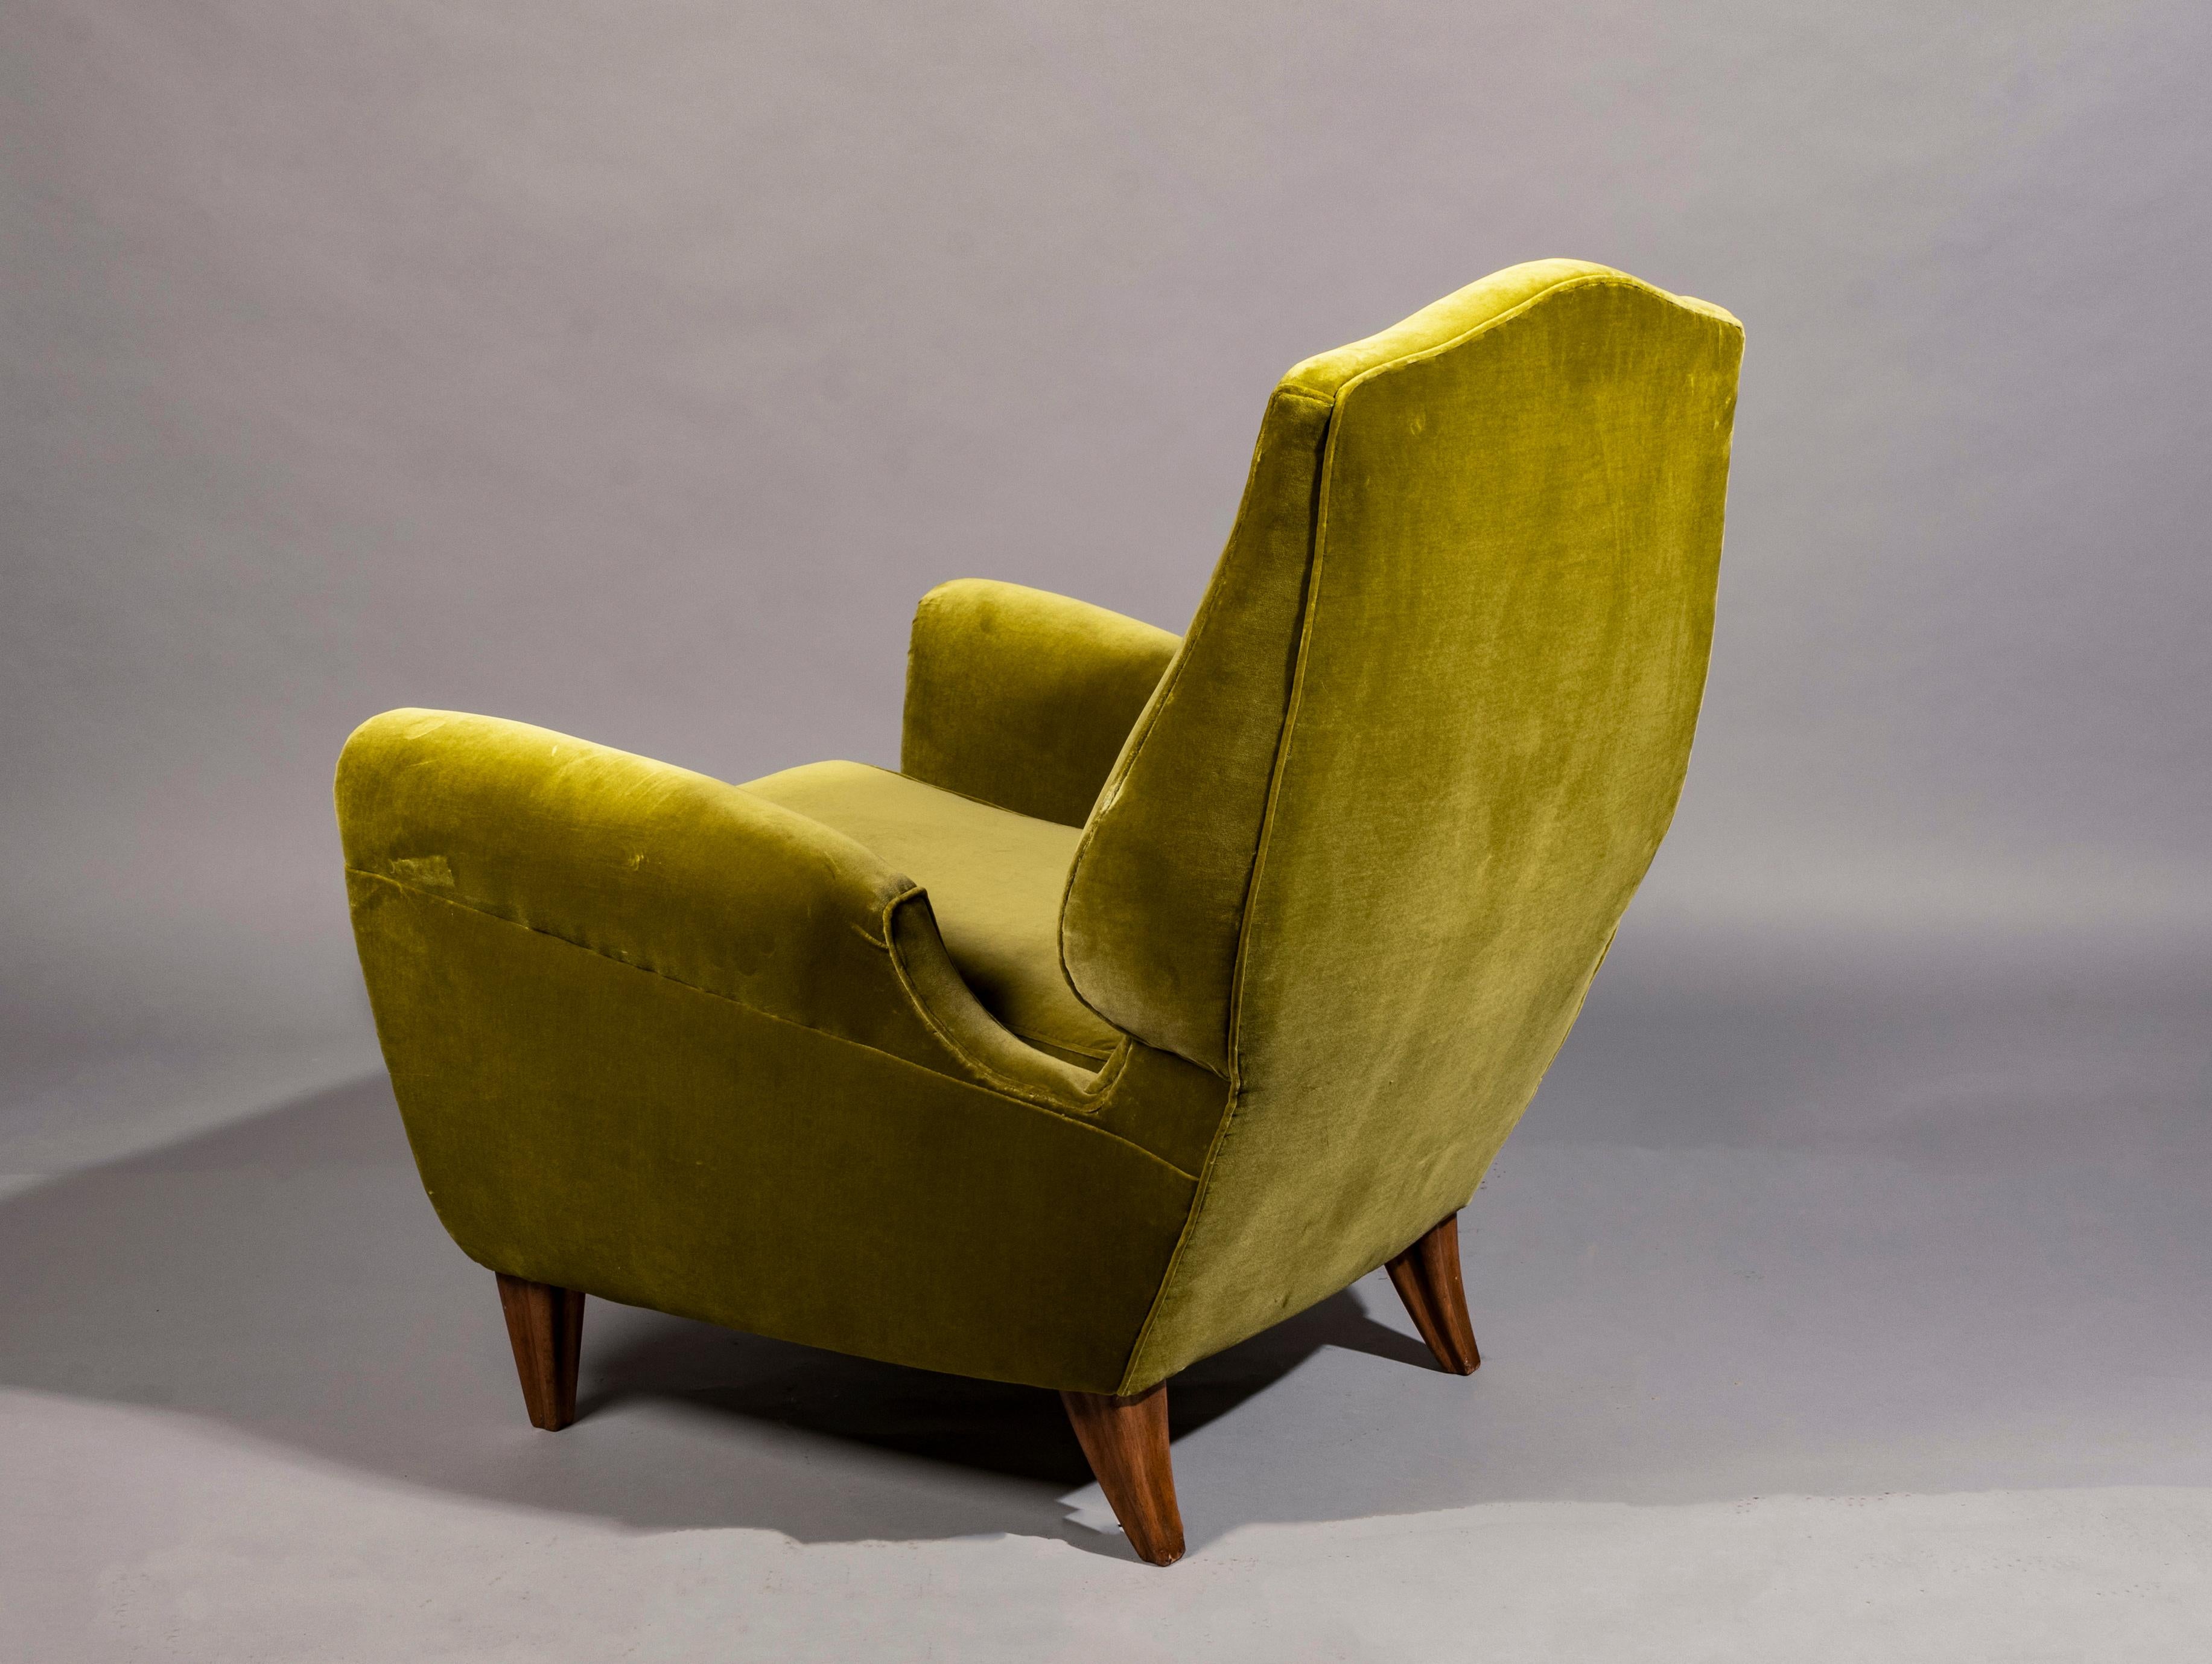 Lounge chair by Pierluigi Colli, designed for his personal home in Turin, Italy 1950s, sculptural form, cherrywood legs, reupholstered in Lelievre cotton velvet, in chartreuse green, how originally designed.